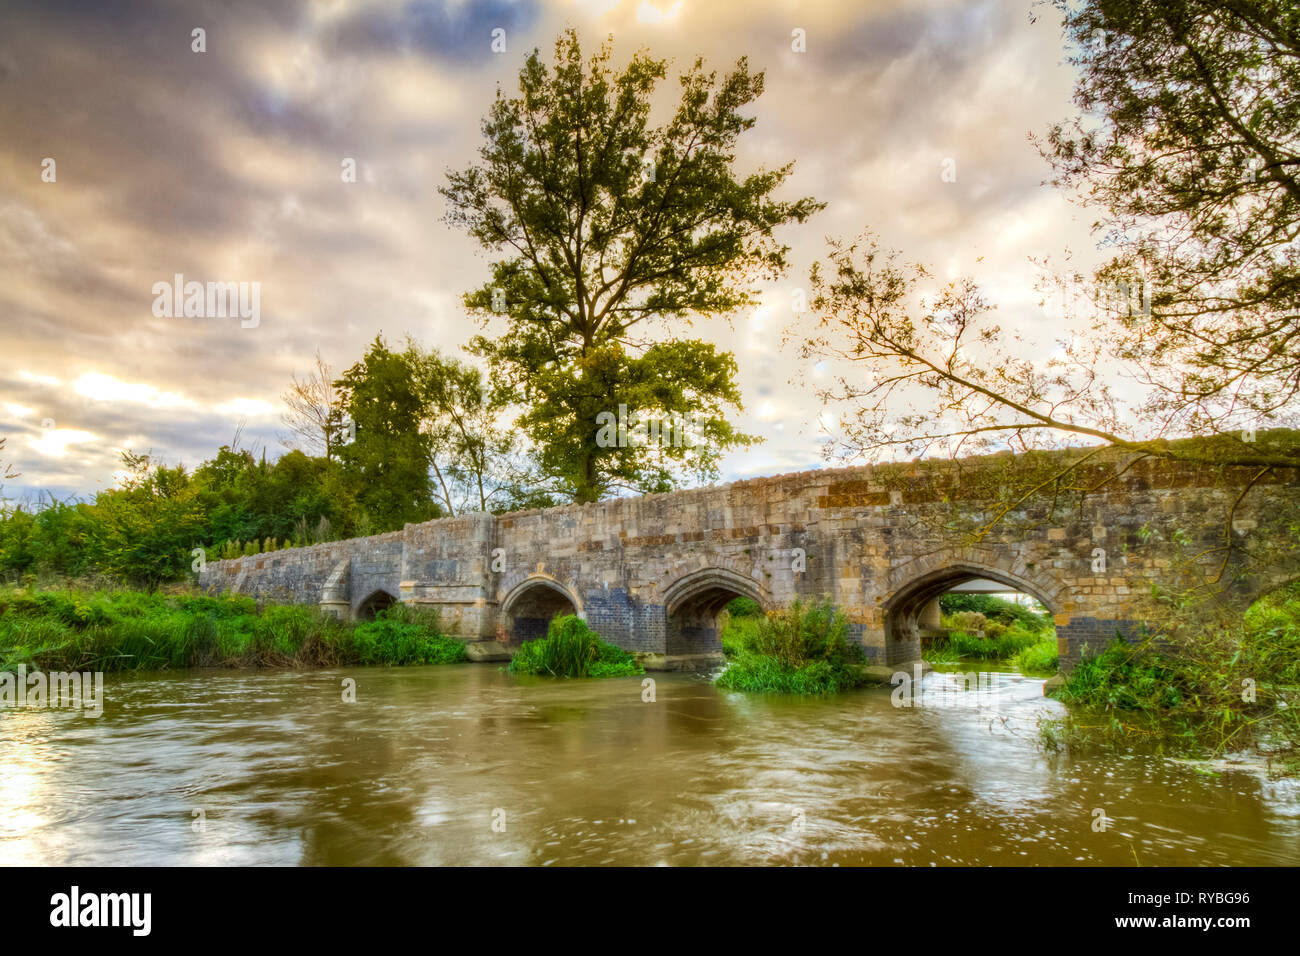 Old stone medival bridge over a streaming river in England. Dramatic cloudscape and old color tones Stock Photo